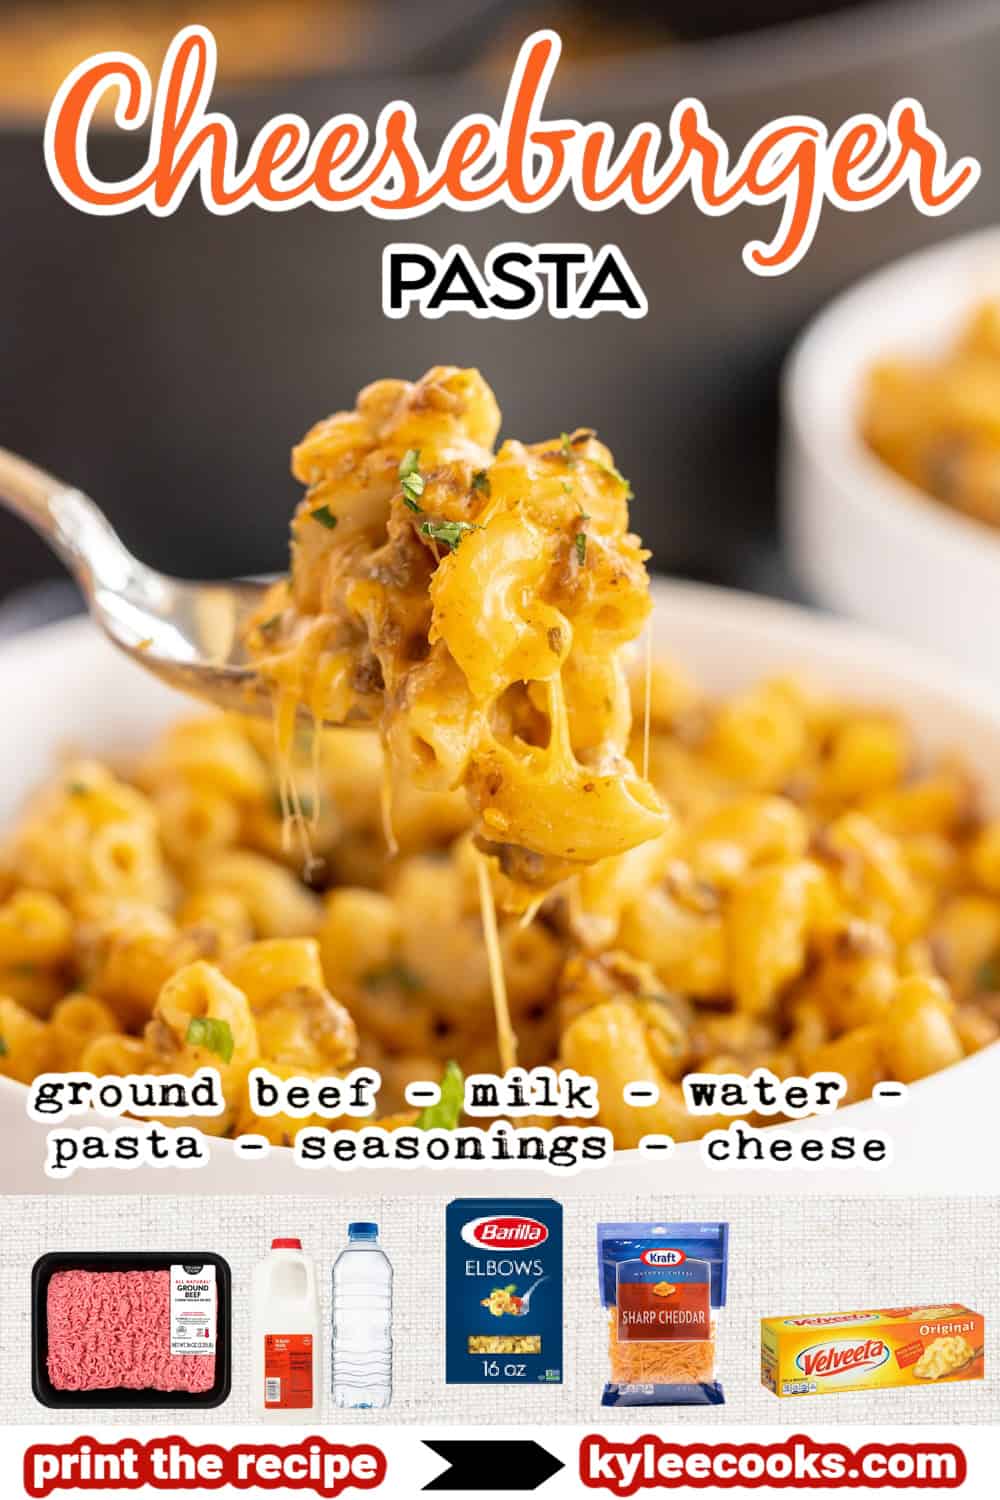 cheeseburger pasta with recipe name overlaid in text.